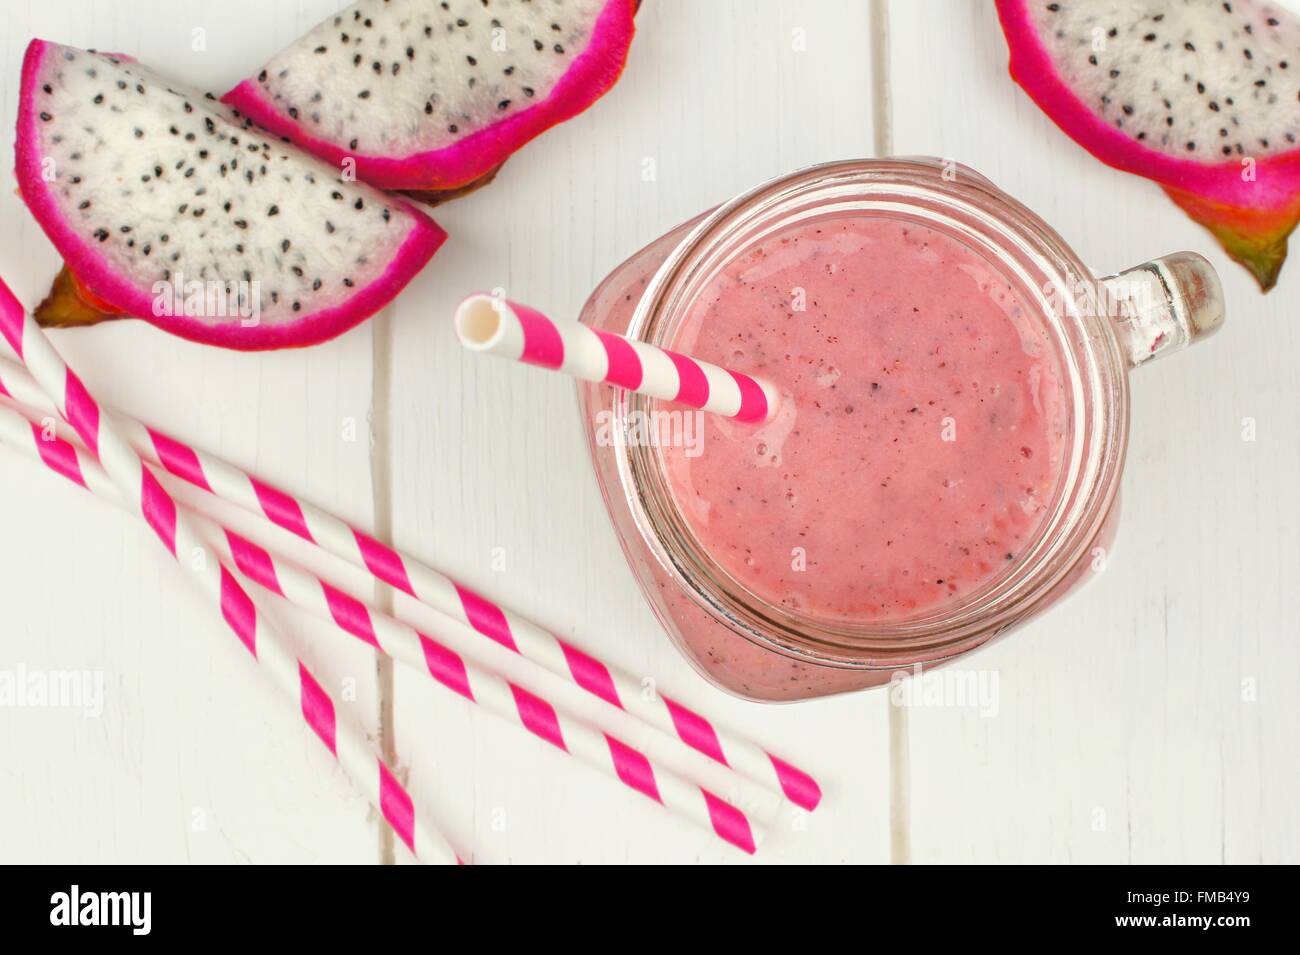 Pink raspberry, dragon fruit smoothie with fruit slices and straws on a white wood background, downward view Stock Photo